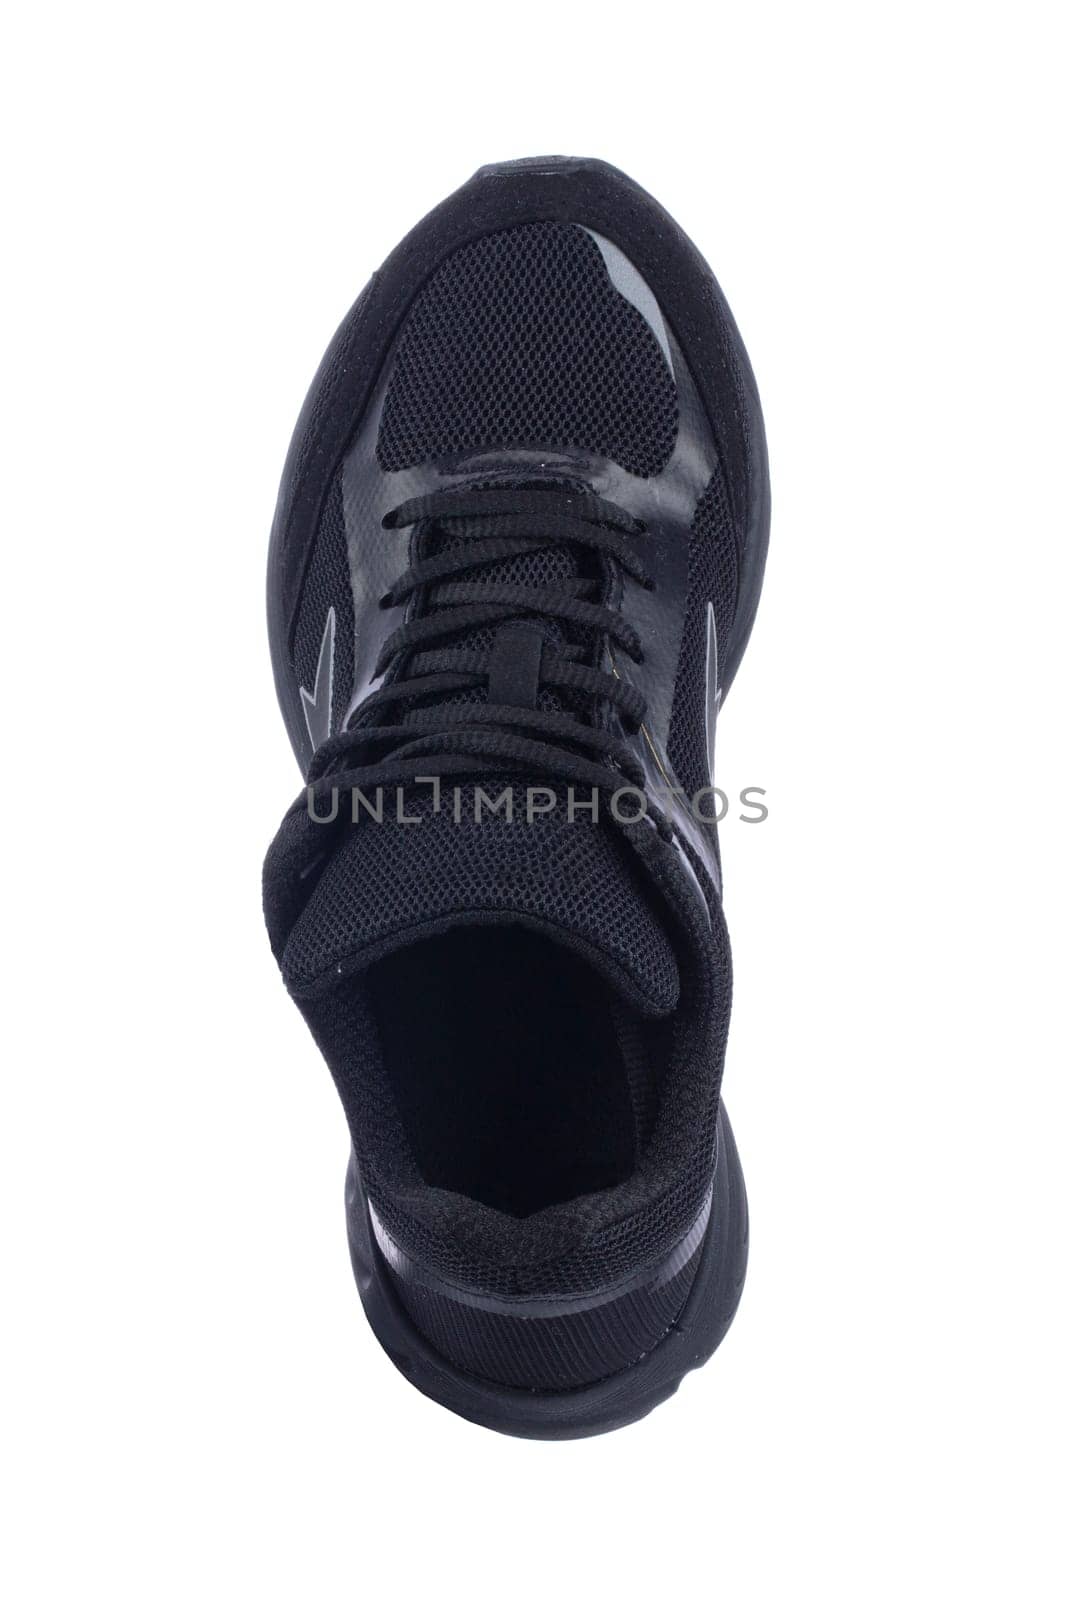 Sneaker one made of black fabric with lacing on a white background.